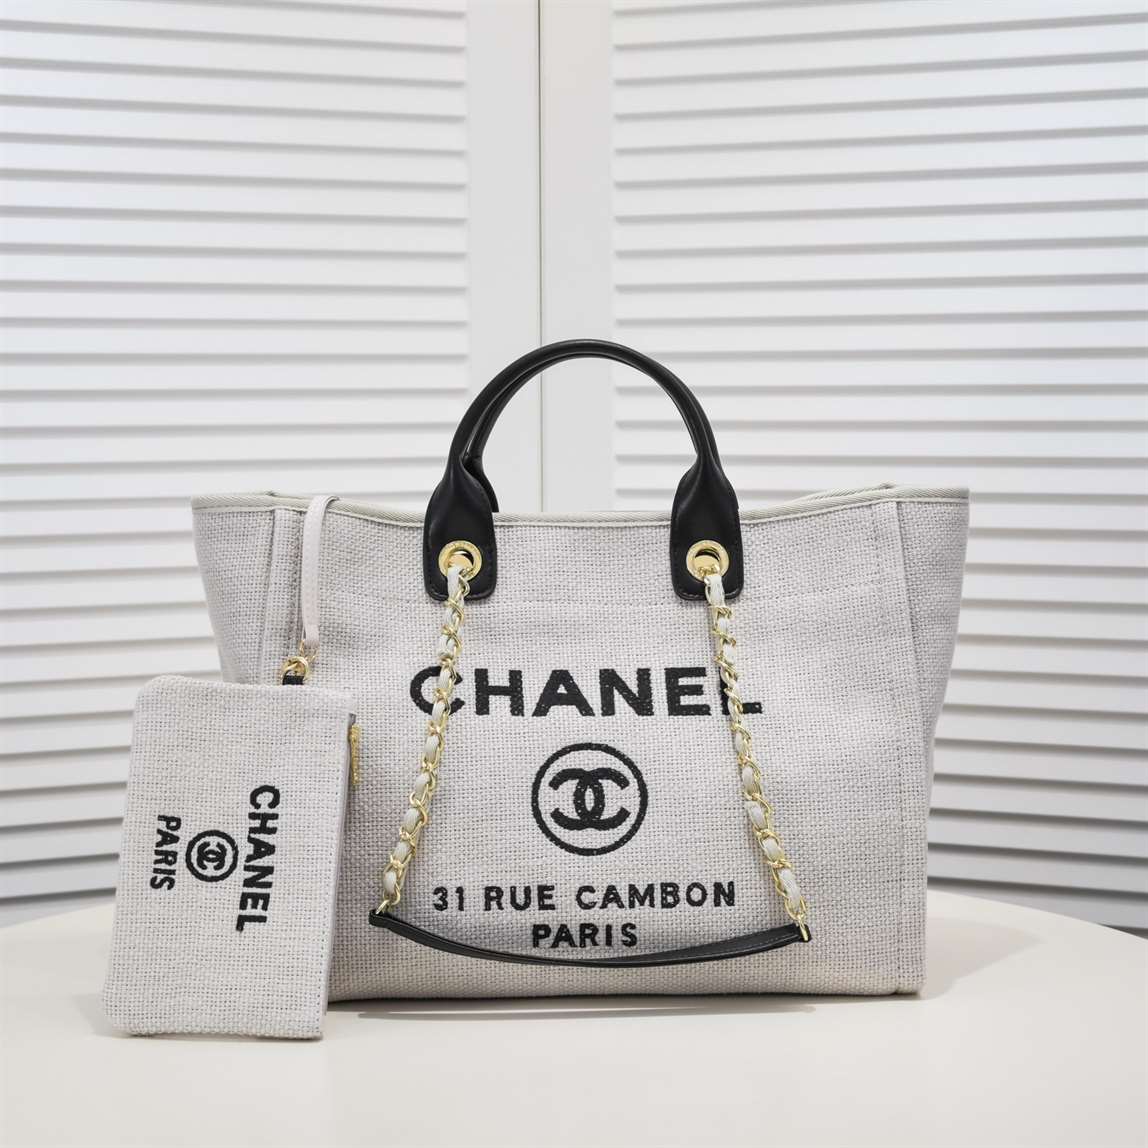 Chanel Medium Deauville Tote bag replica - Affordable Luxury Bags